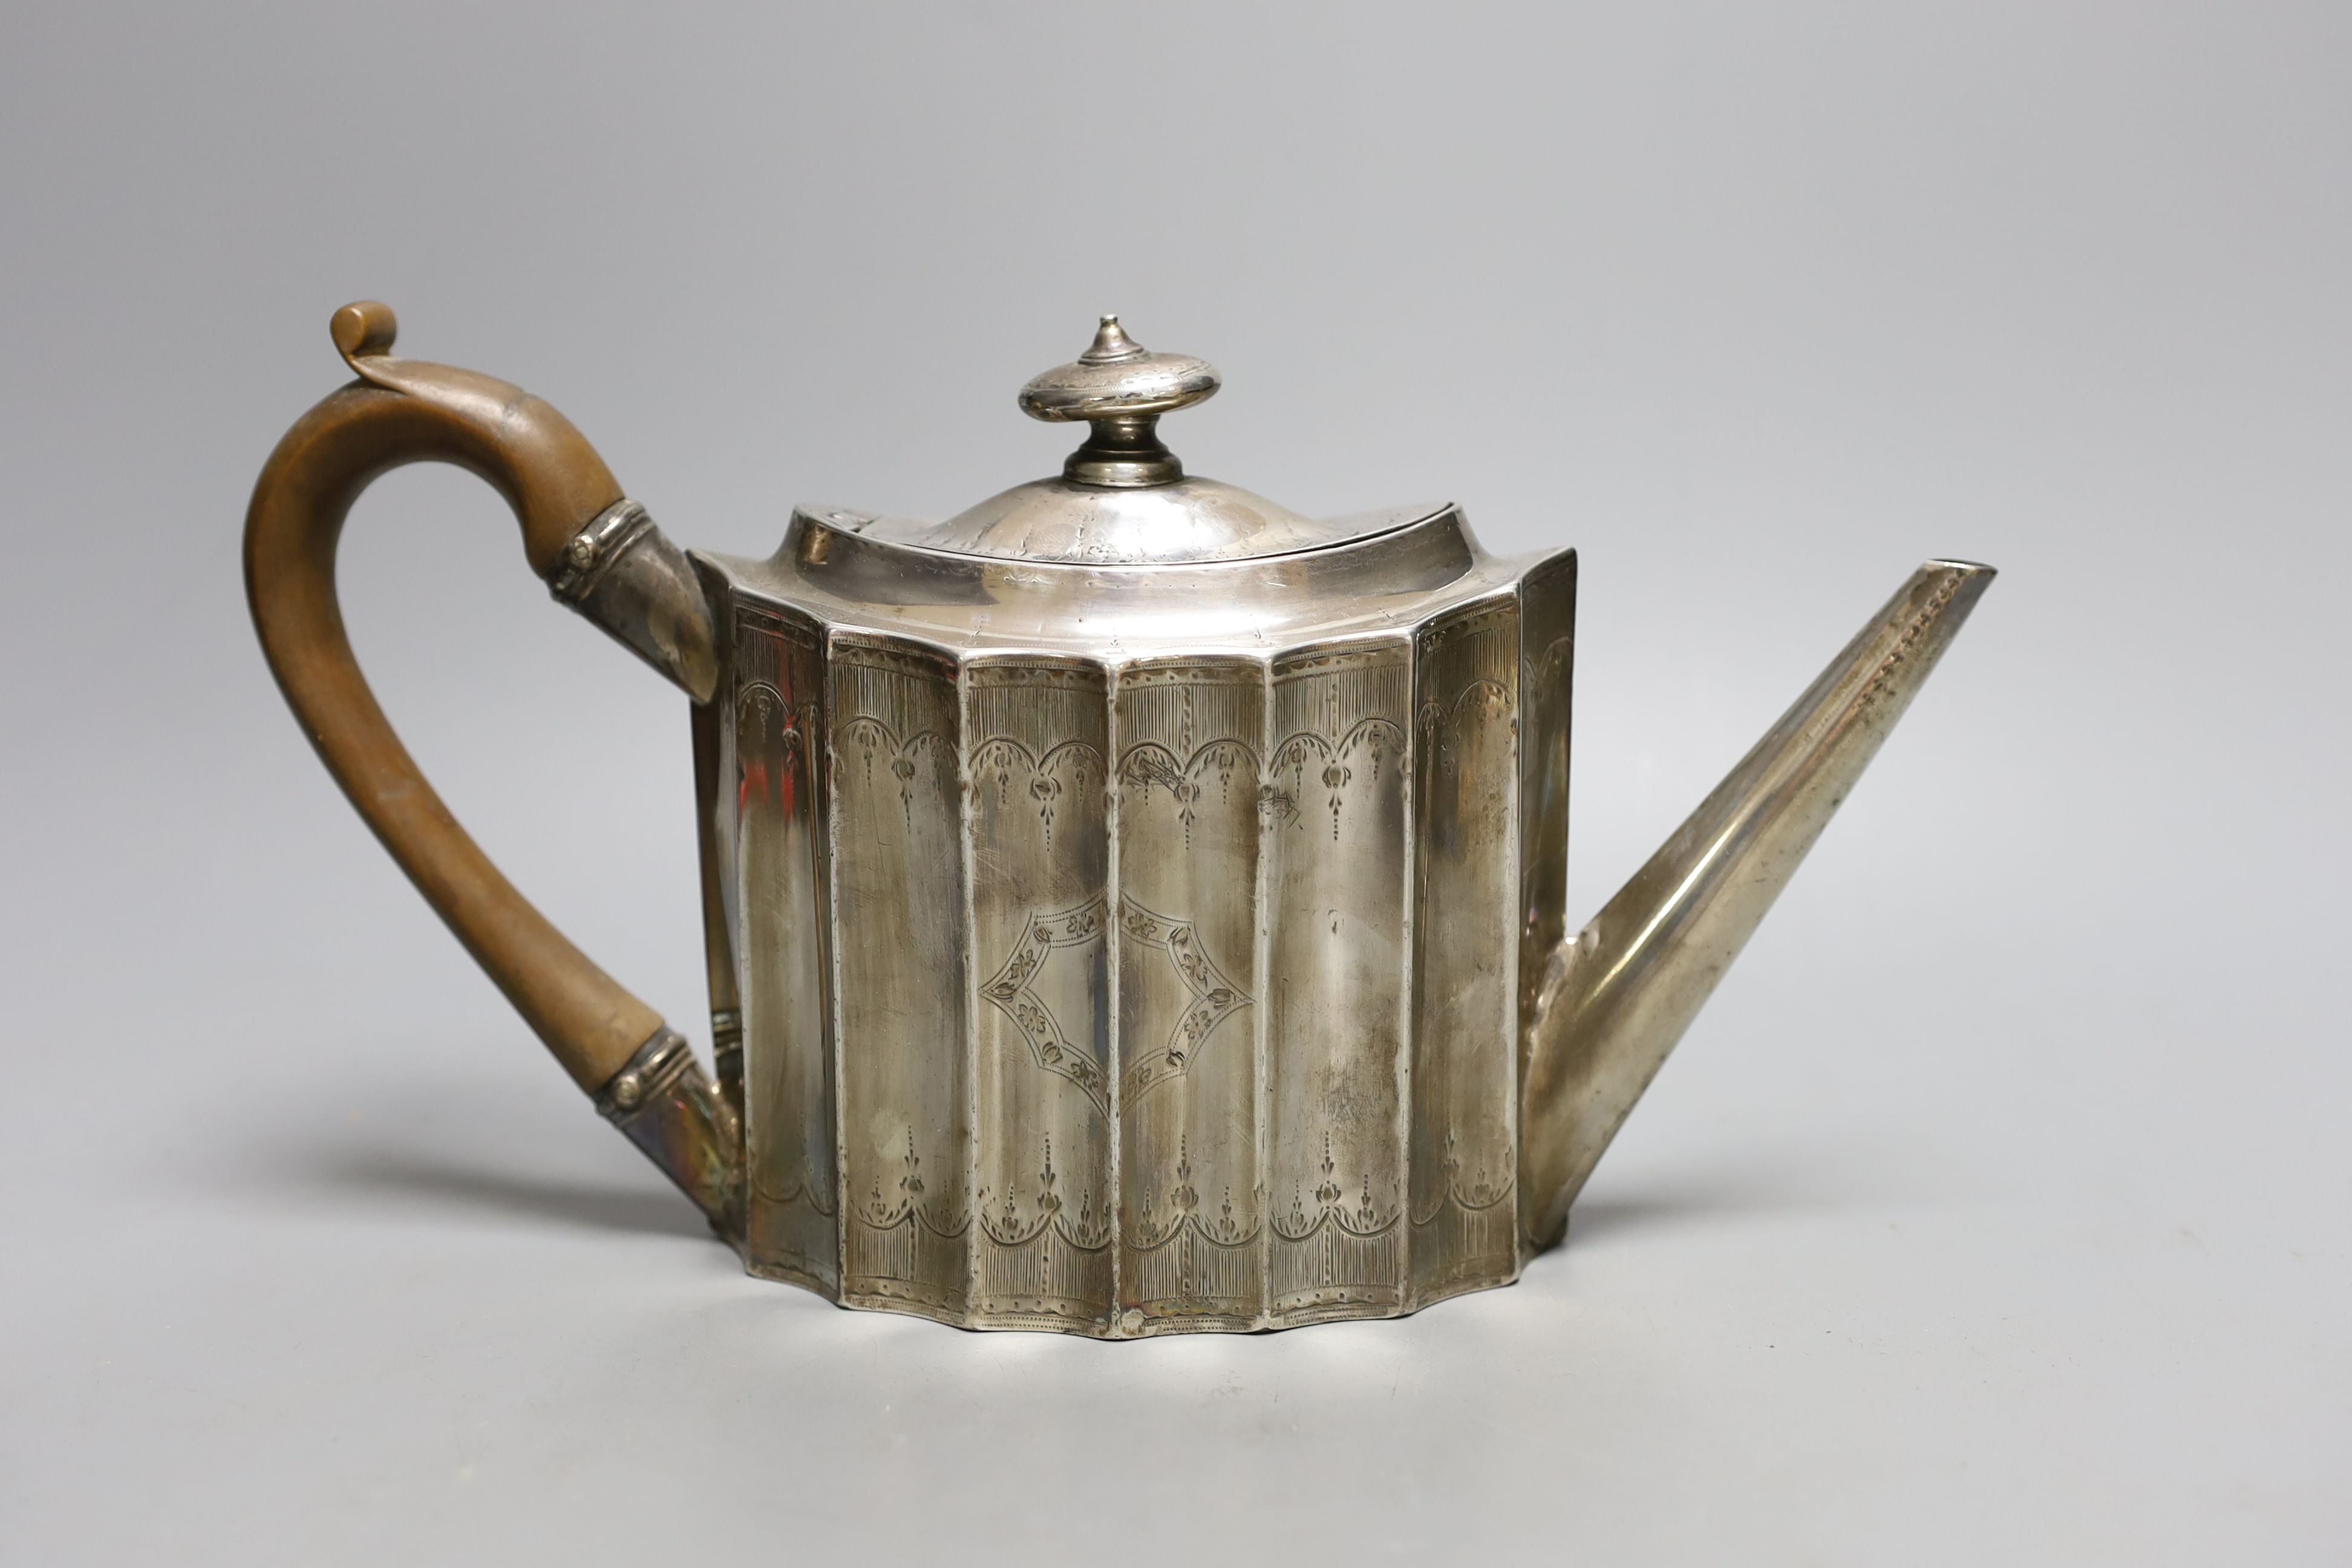 A George III engraved silver oval 'batwing' shaped teapot, George Smith II, London, 1788, gross weight 14.5oz.